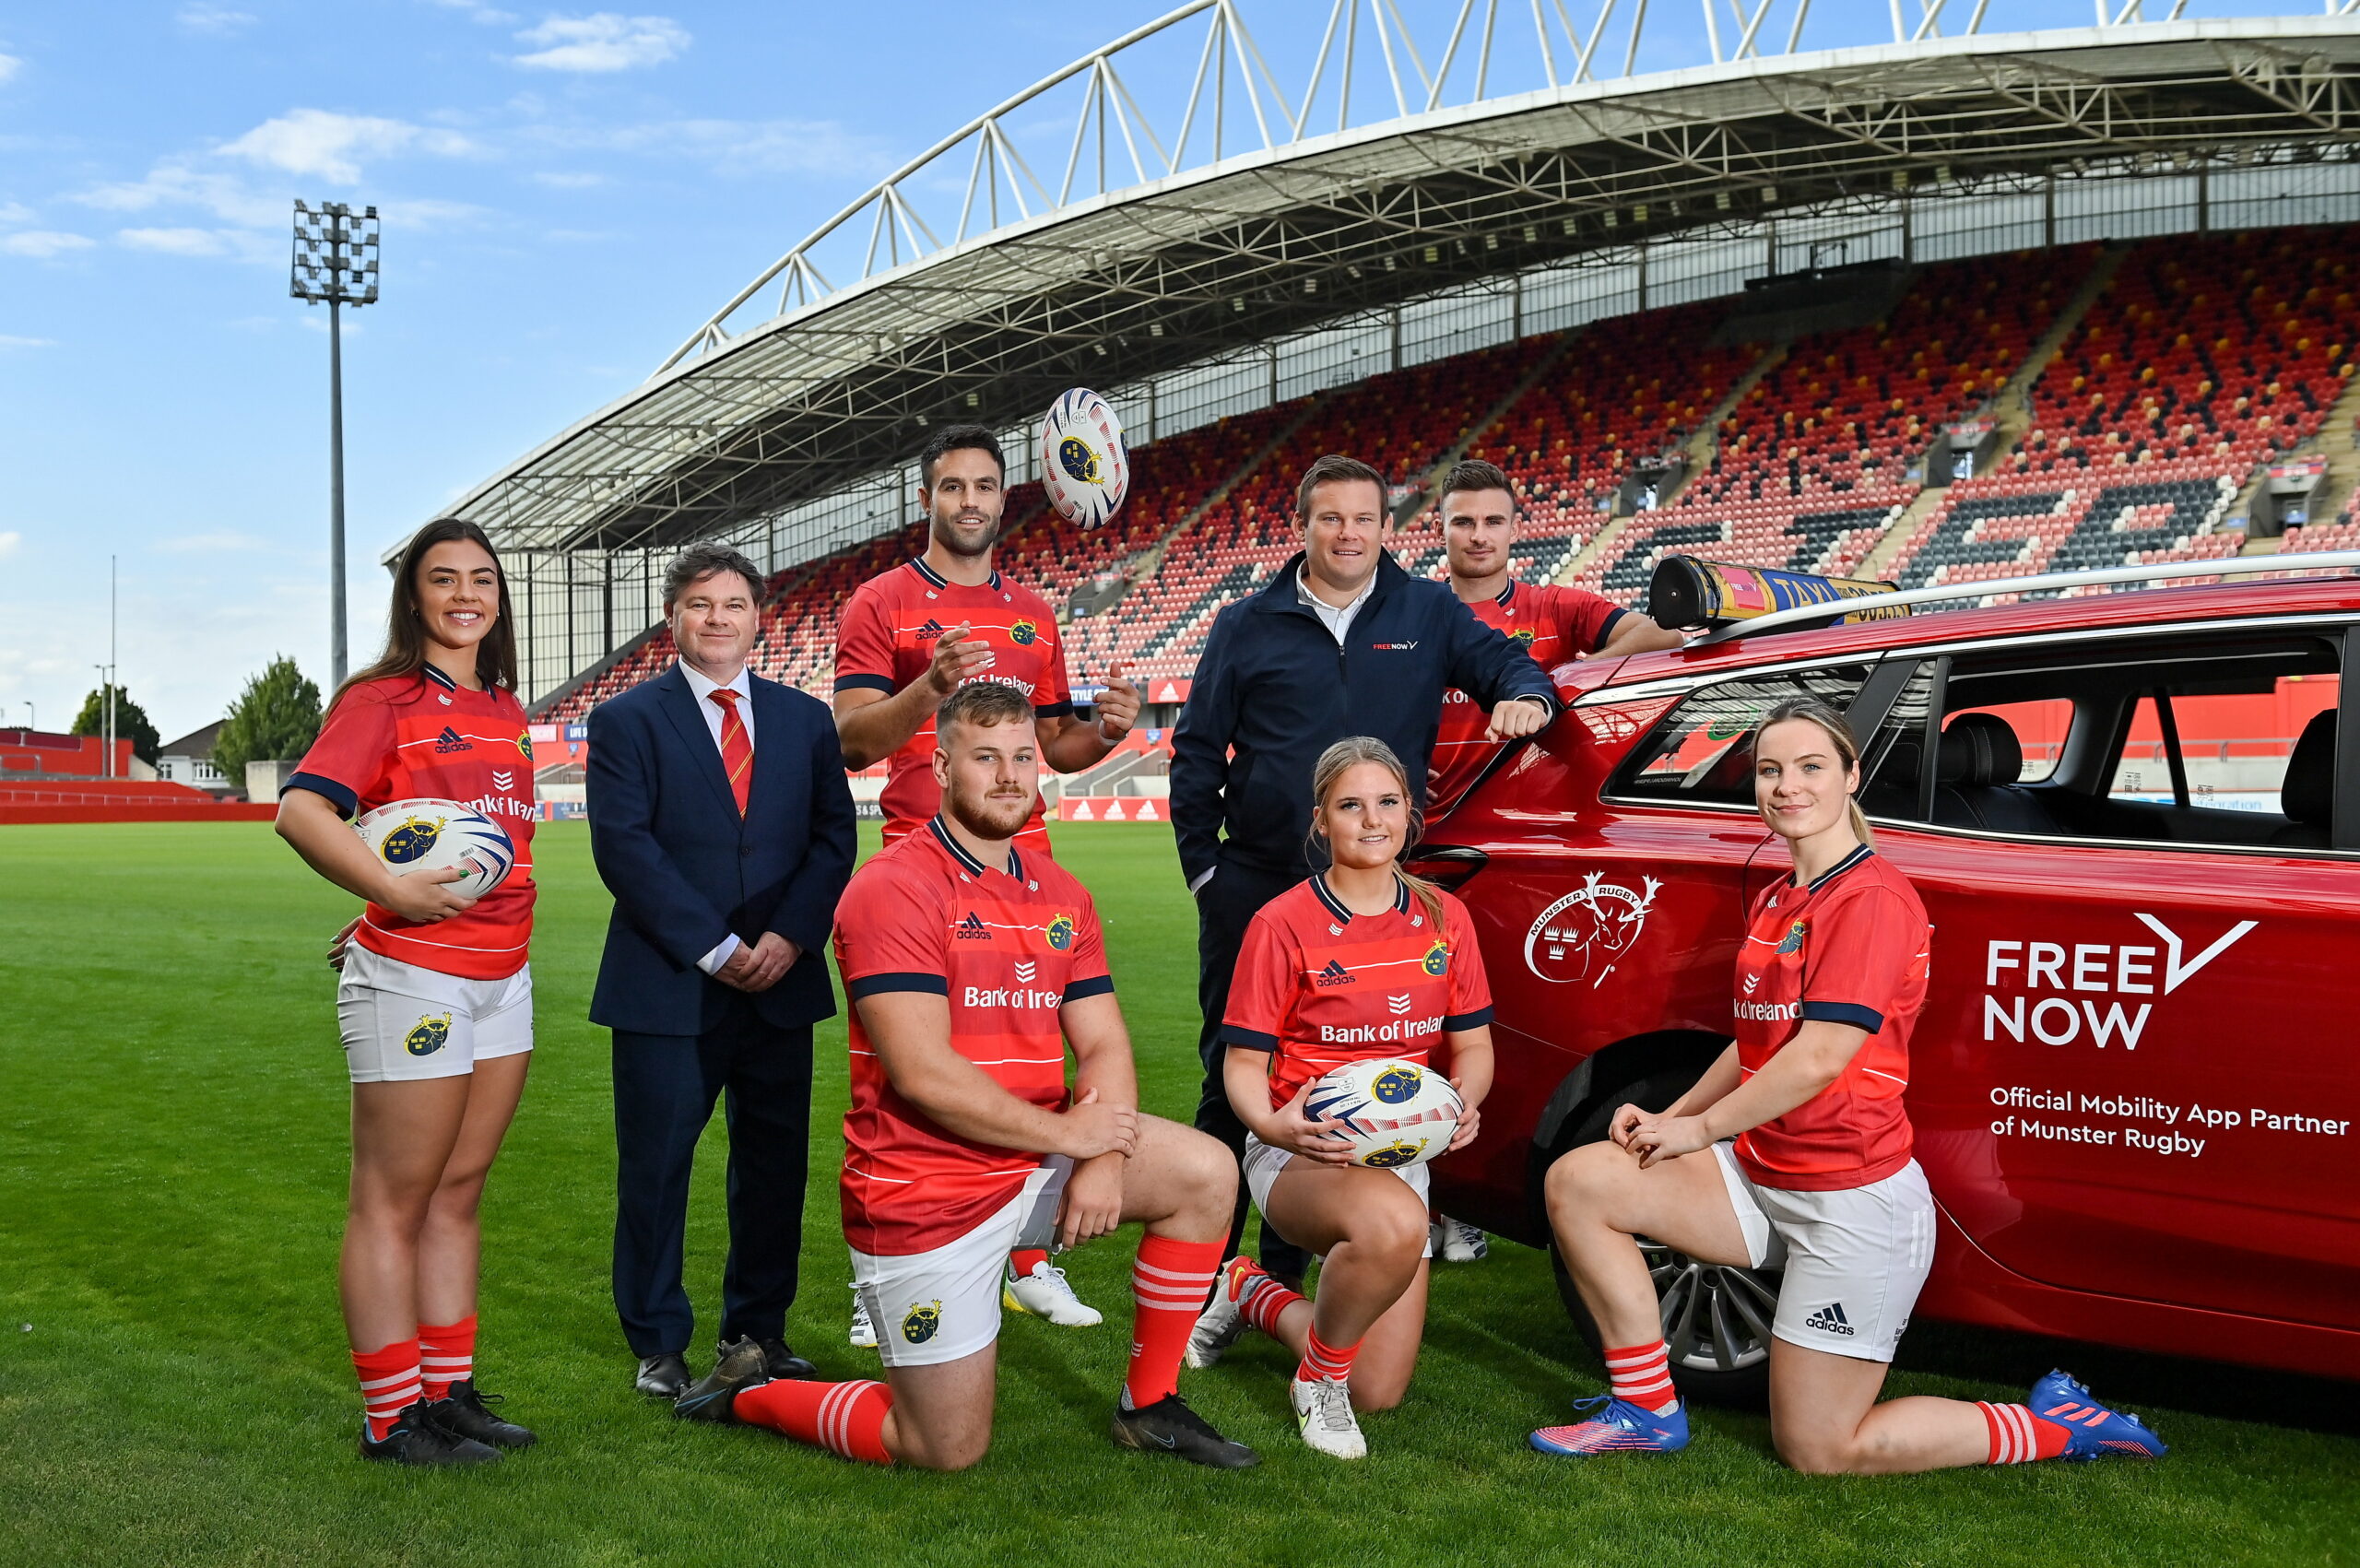 RUGBY NEWS FREE NOW app signs deal with Munster Rugby